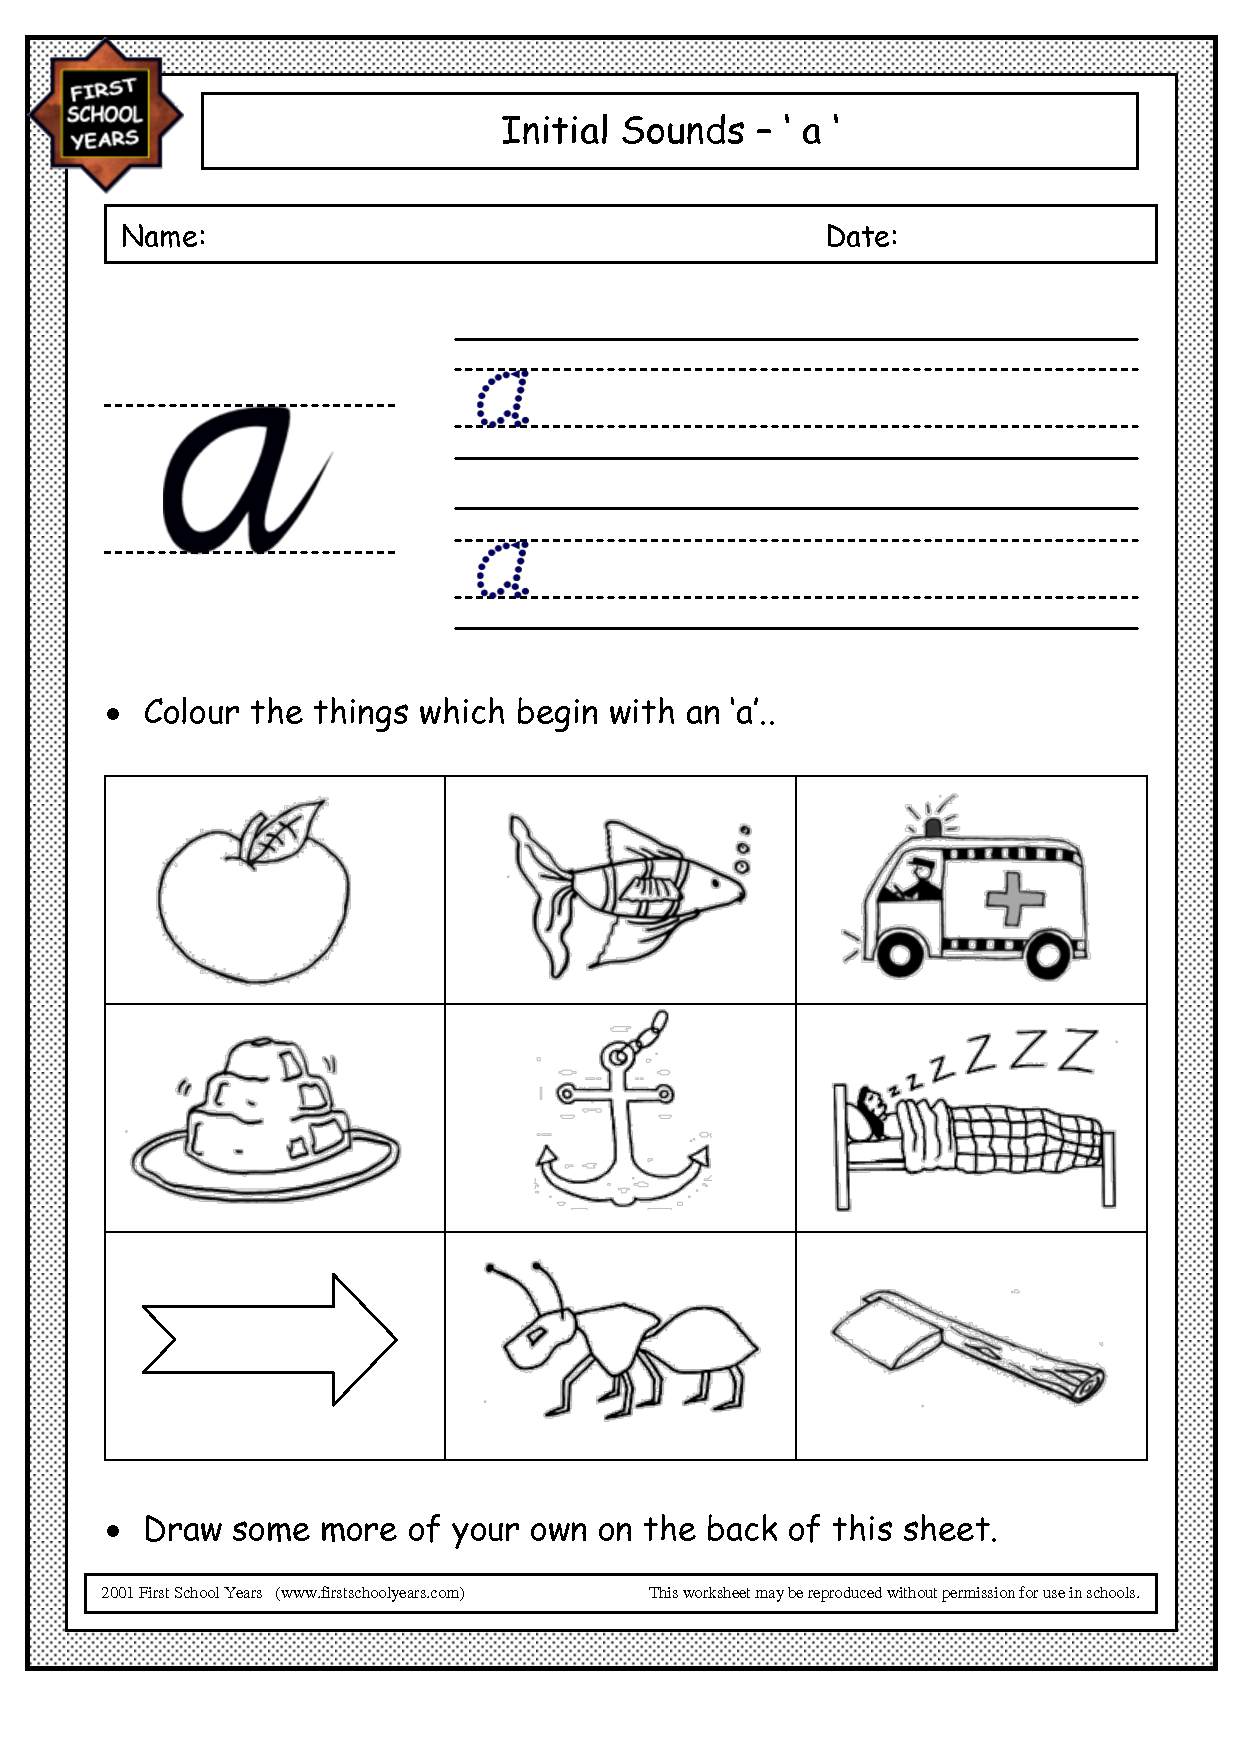 12 Best Images of Free Jolly Phonics Worksheets Jolly Phonics